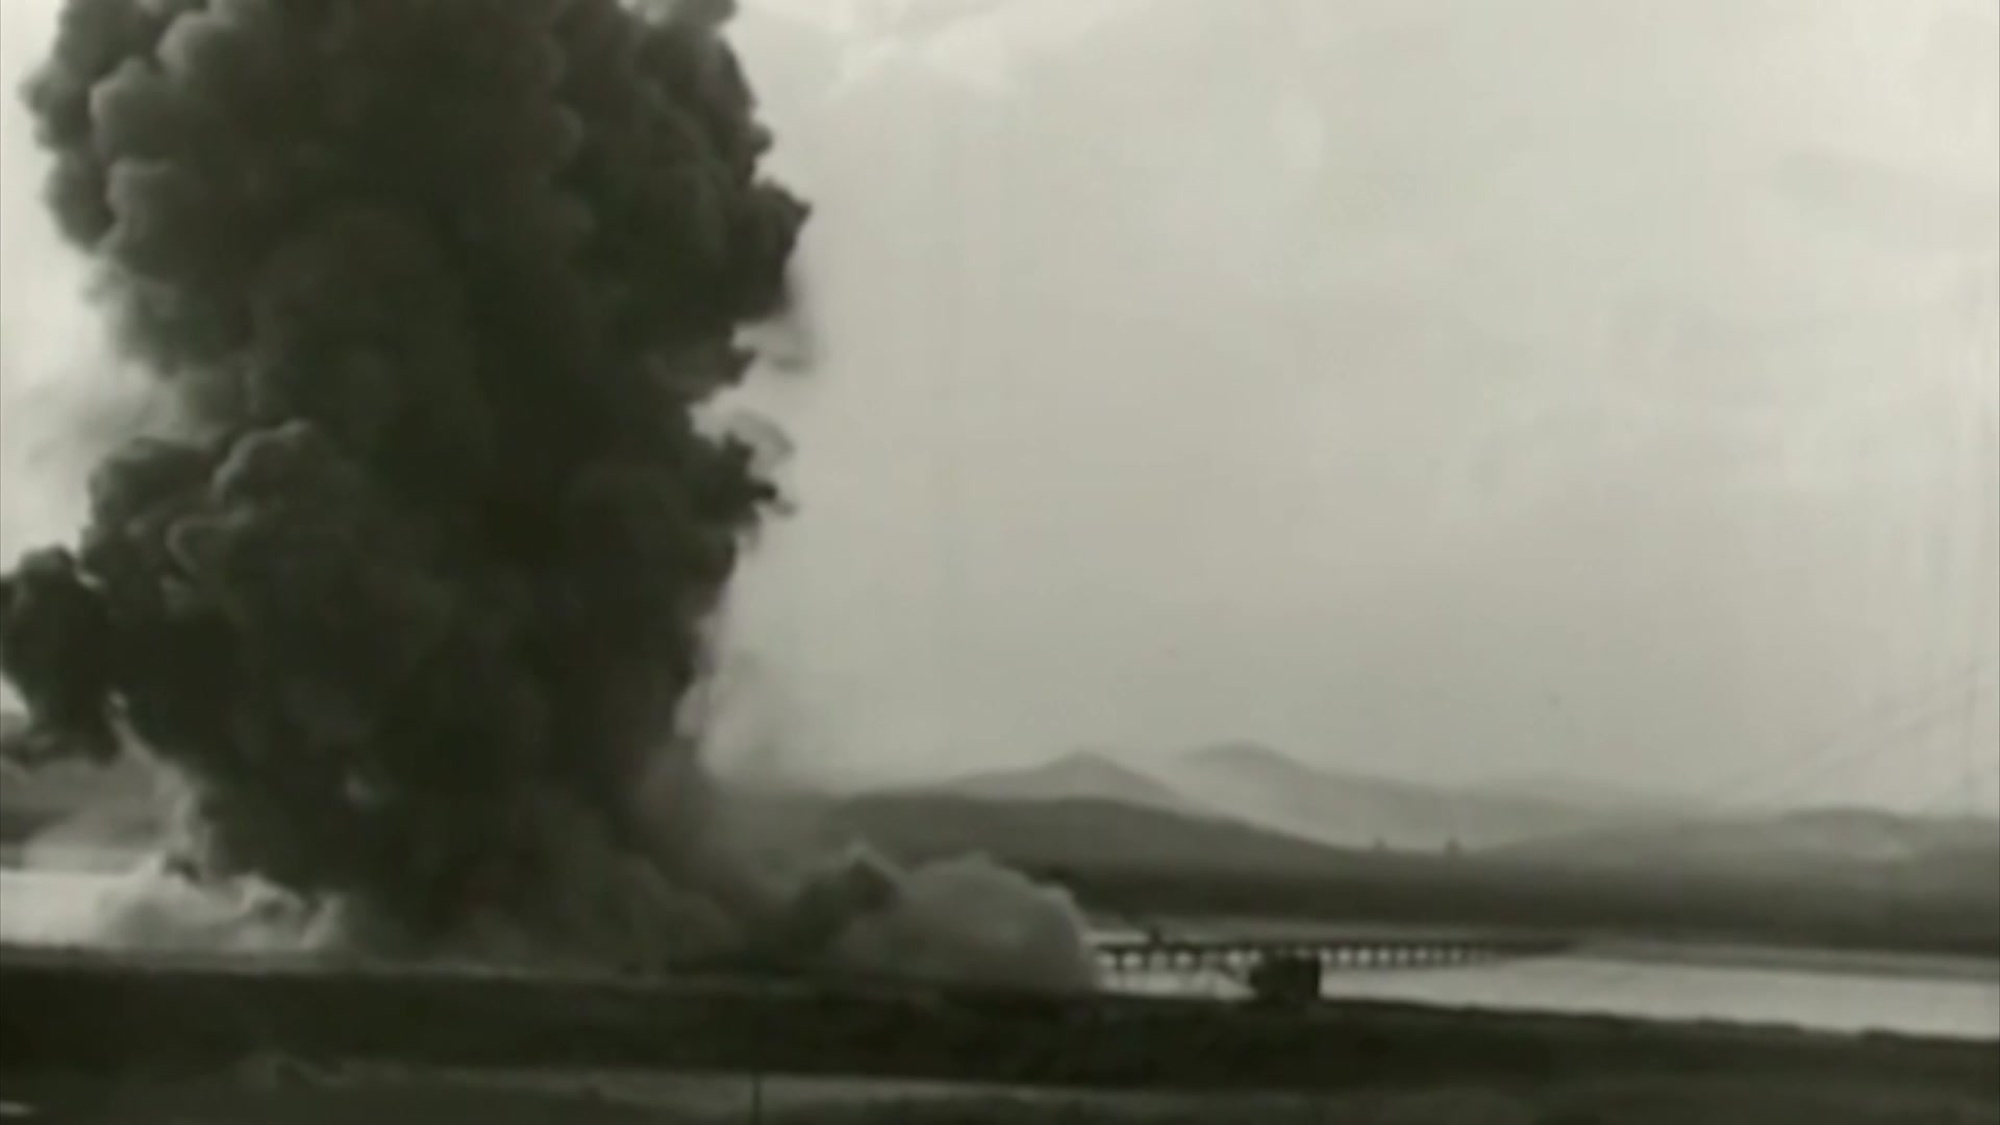 Black smoke billows up near a body of water, as if from an explosion. 